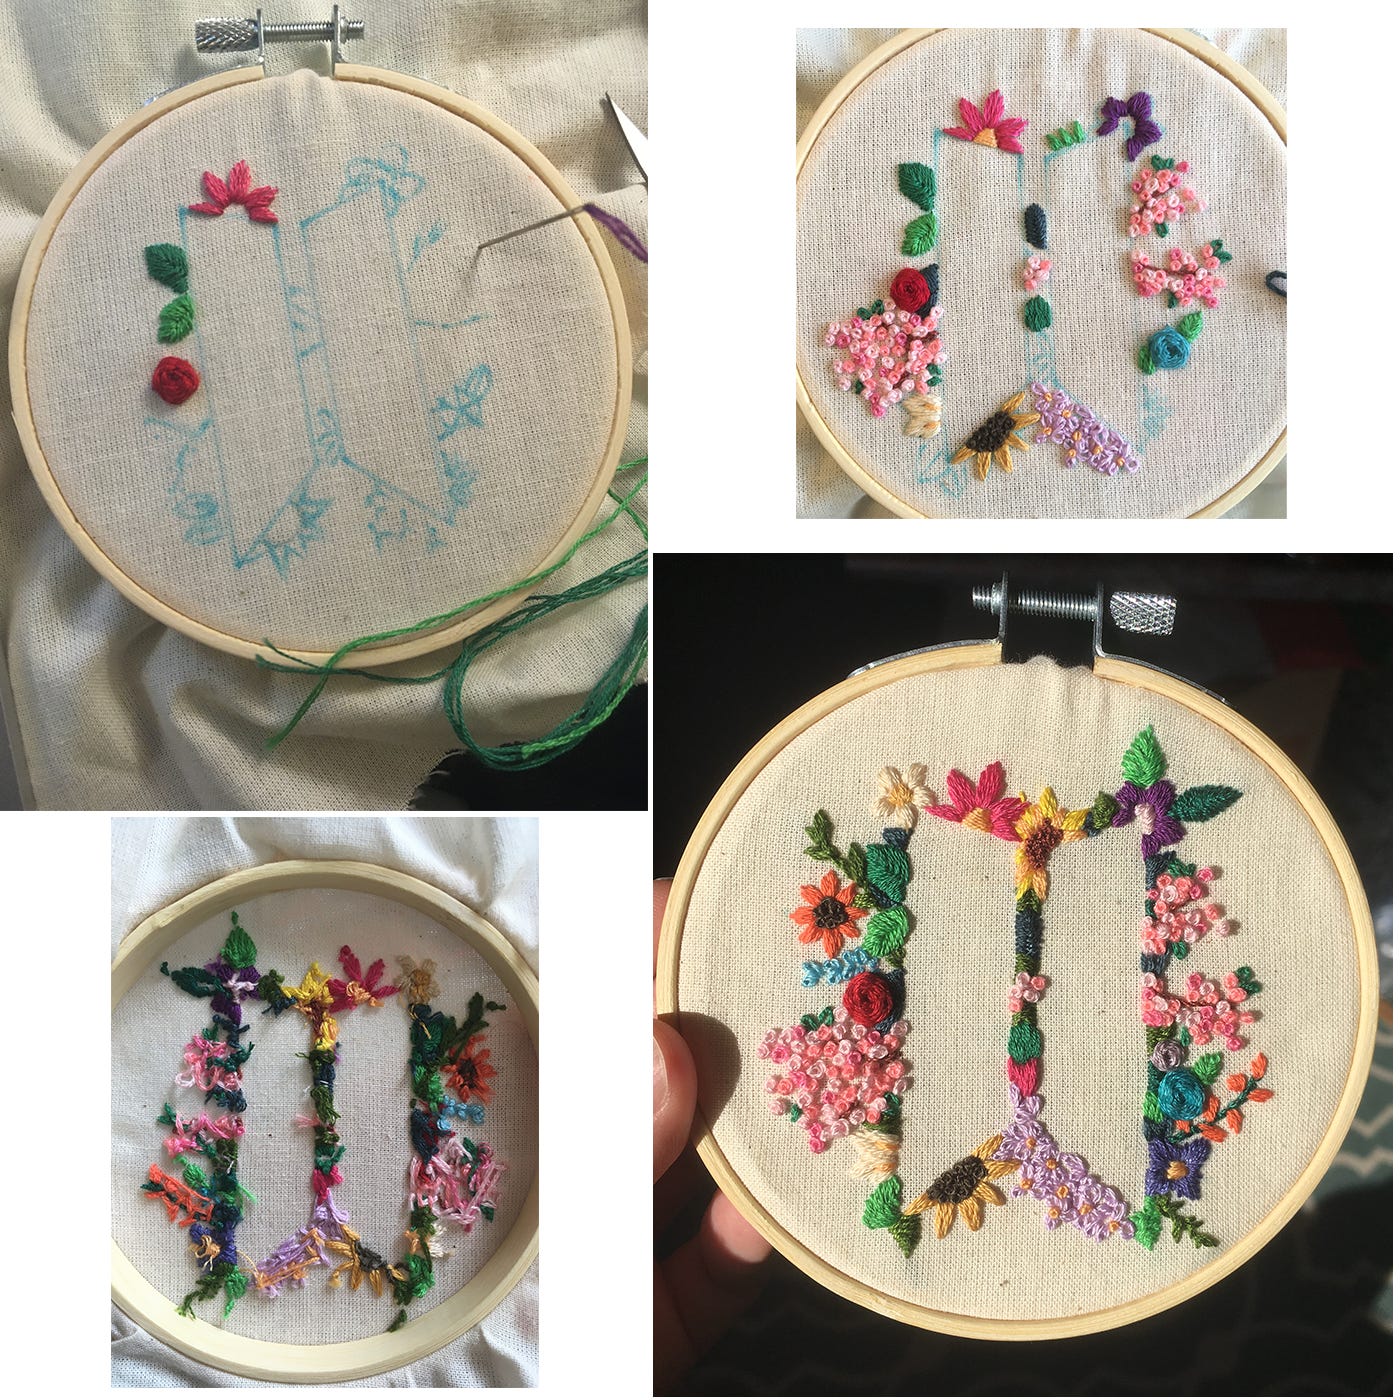 Progress photos for embroidery of BTS logo 